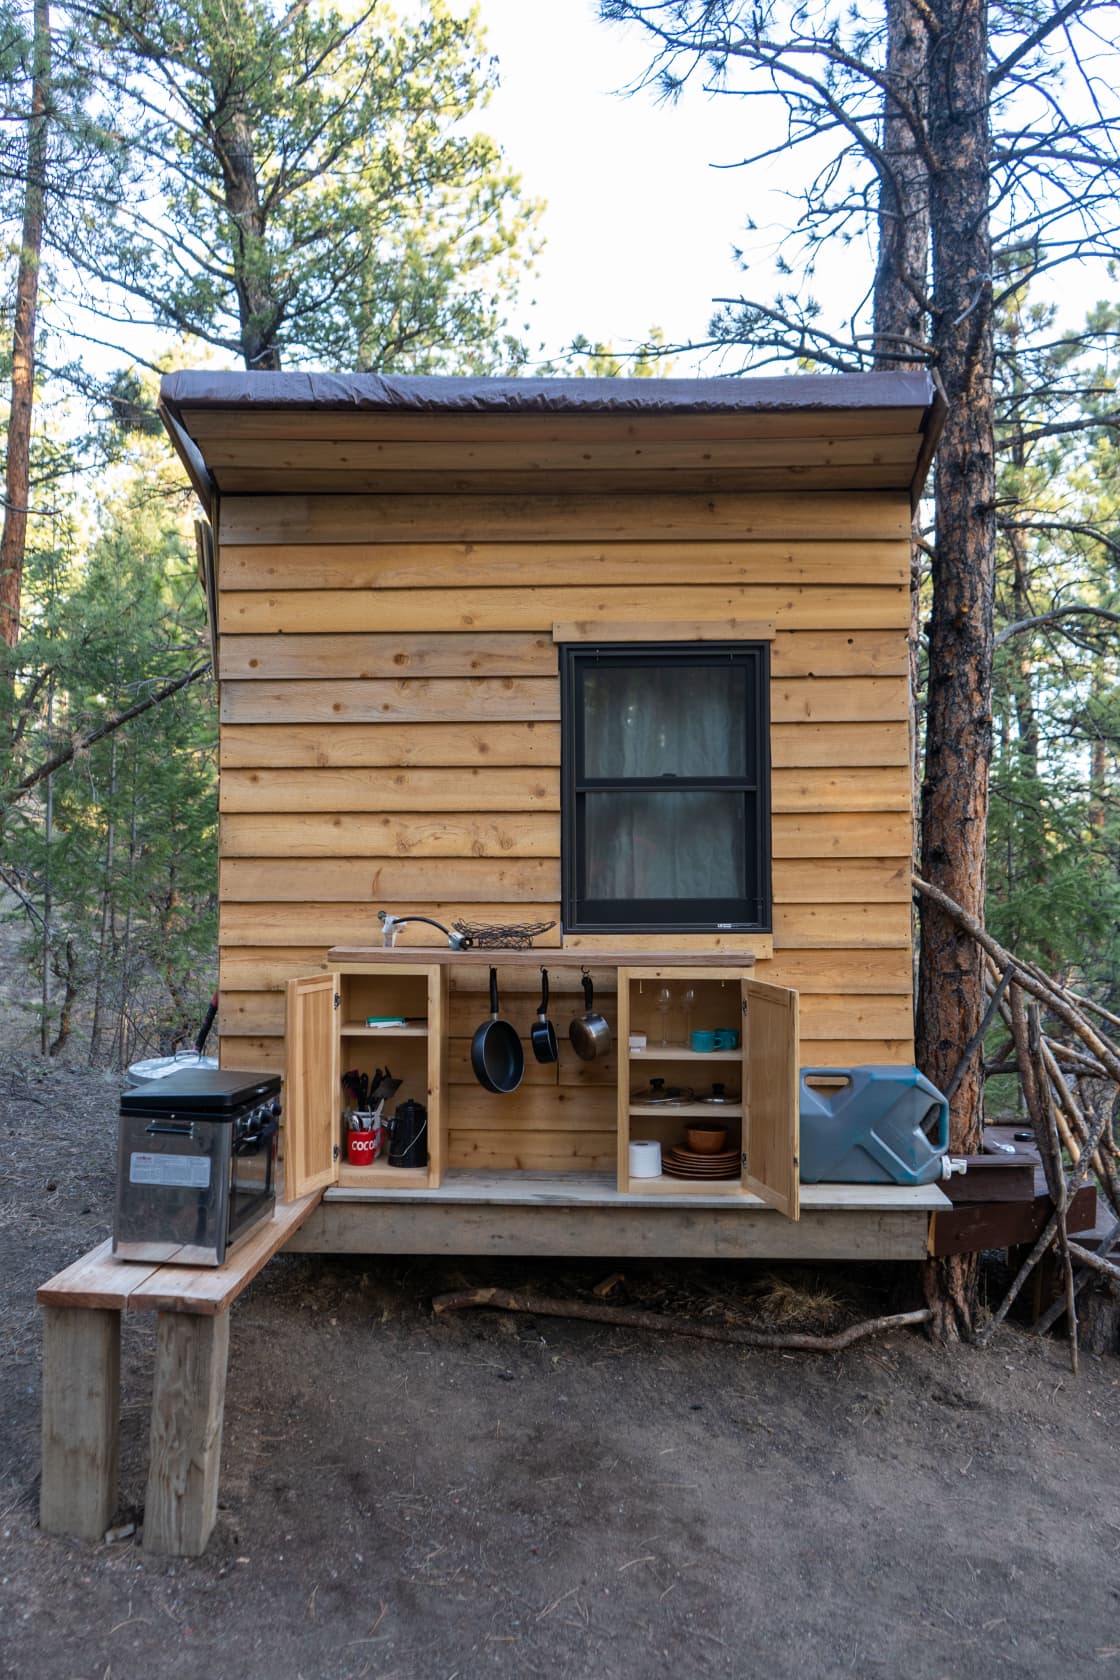 The side view. The Cabin comes with pans, a stove, utensils, a lighter and a water jug. Basically, everything you would need